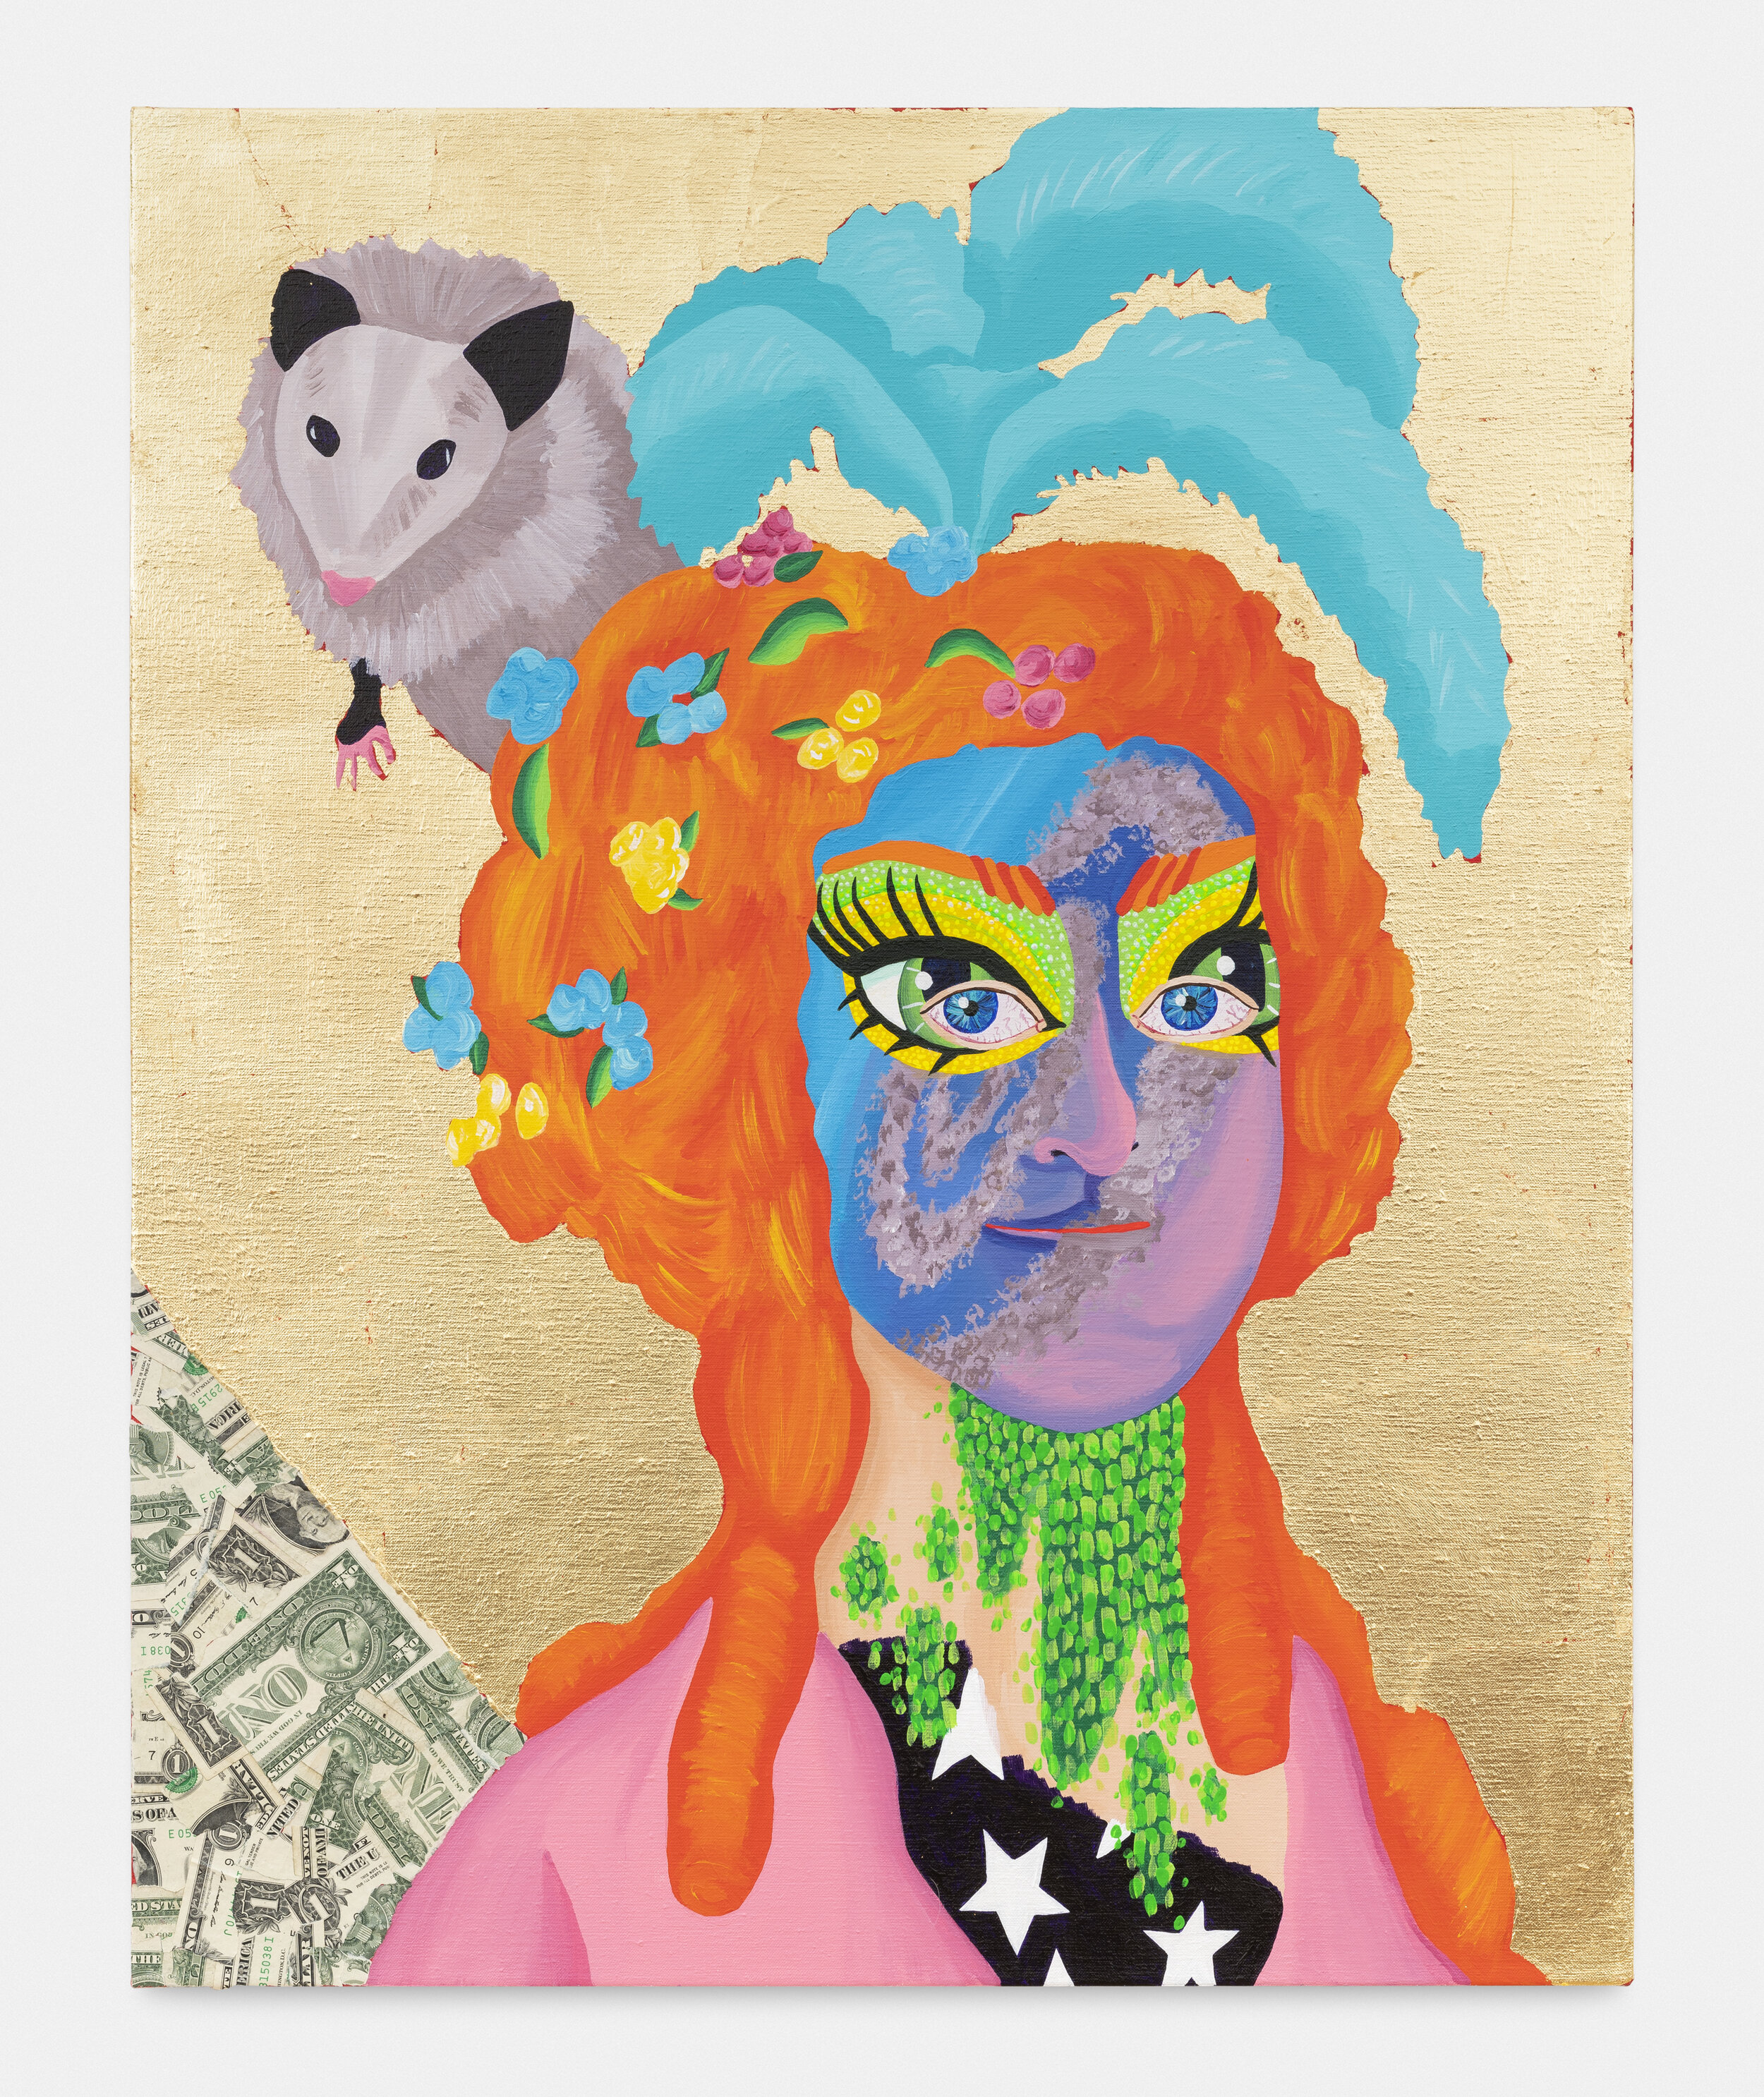   Old Put with Spiral Jetty Face Paint,  2020  30 x 24 x 1.5 inches (76.2 x 60.96 x 3.81 cm.)  Acrylic, gold lead, and dollar bills on linen 